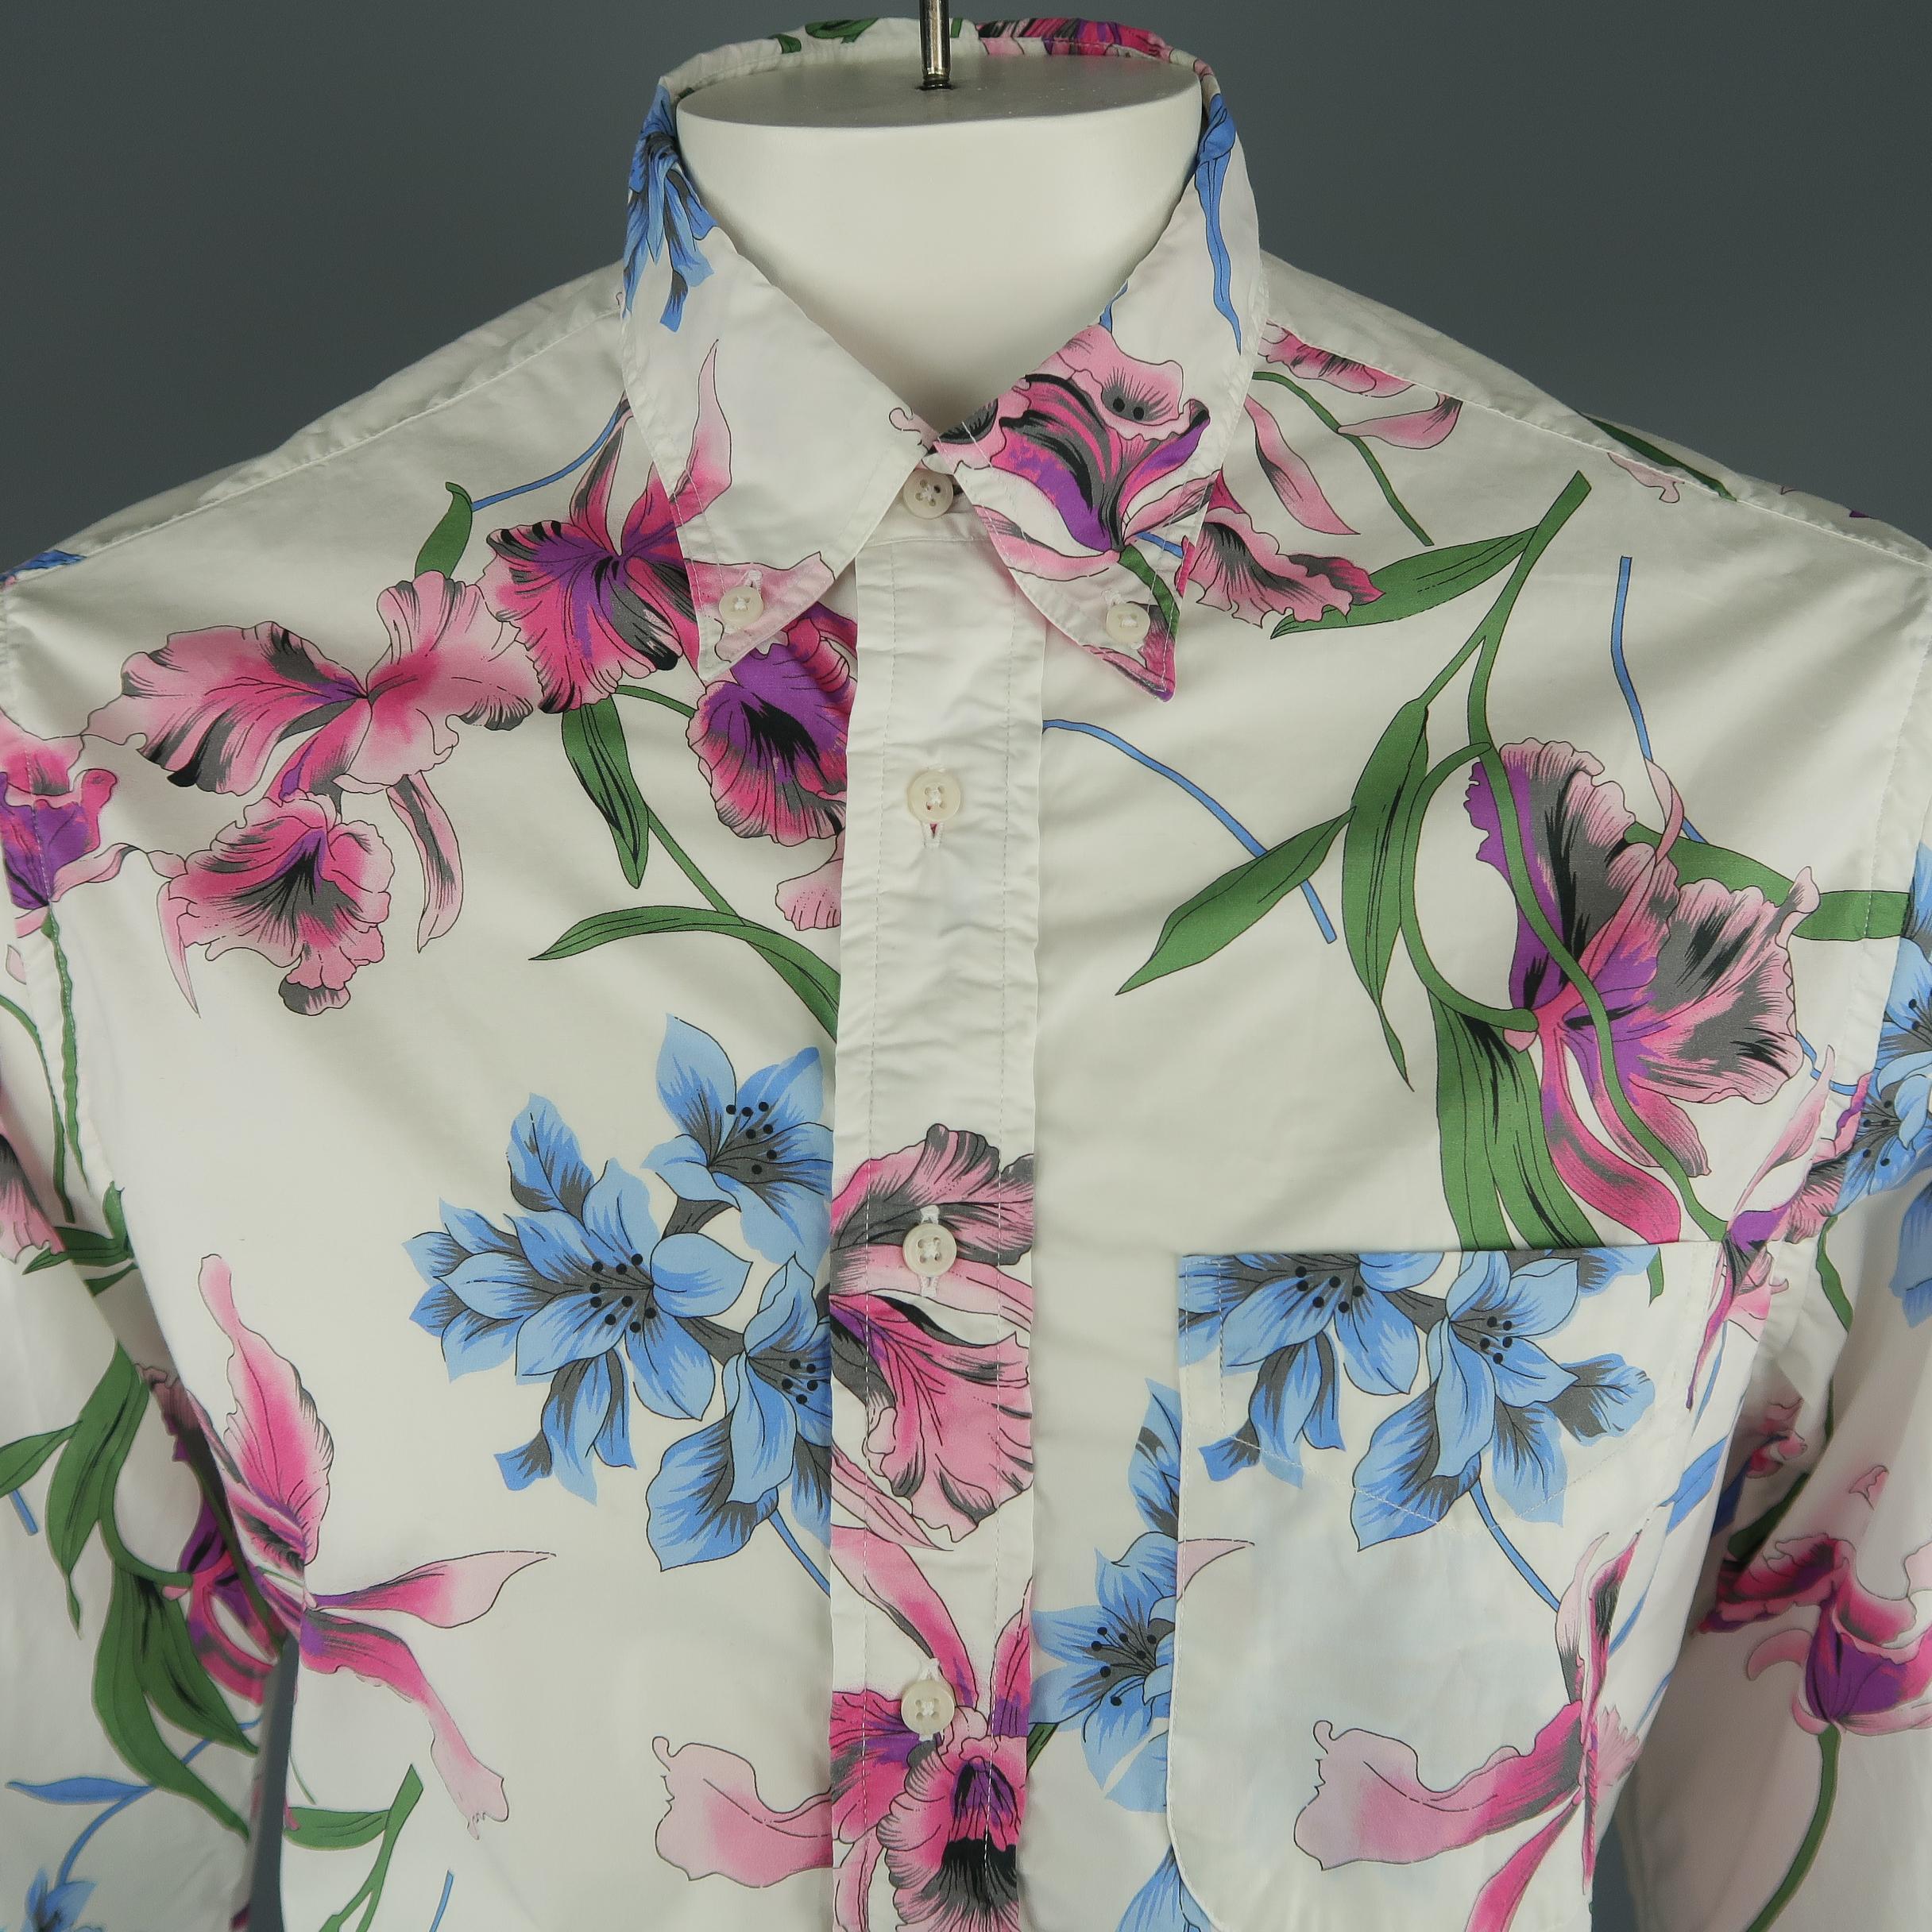 GITMAN VINTAGE long sleeve shirt come in white cotton with a floral print, front pocket and button down. Made in USA.
 
New with Tags.
Marked: L
 
Measurements:
 
Shoulder: 18 in.
Chest: 48 in.
Sleeve: 27.5 in.
Length: 33 in.